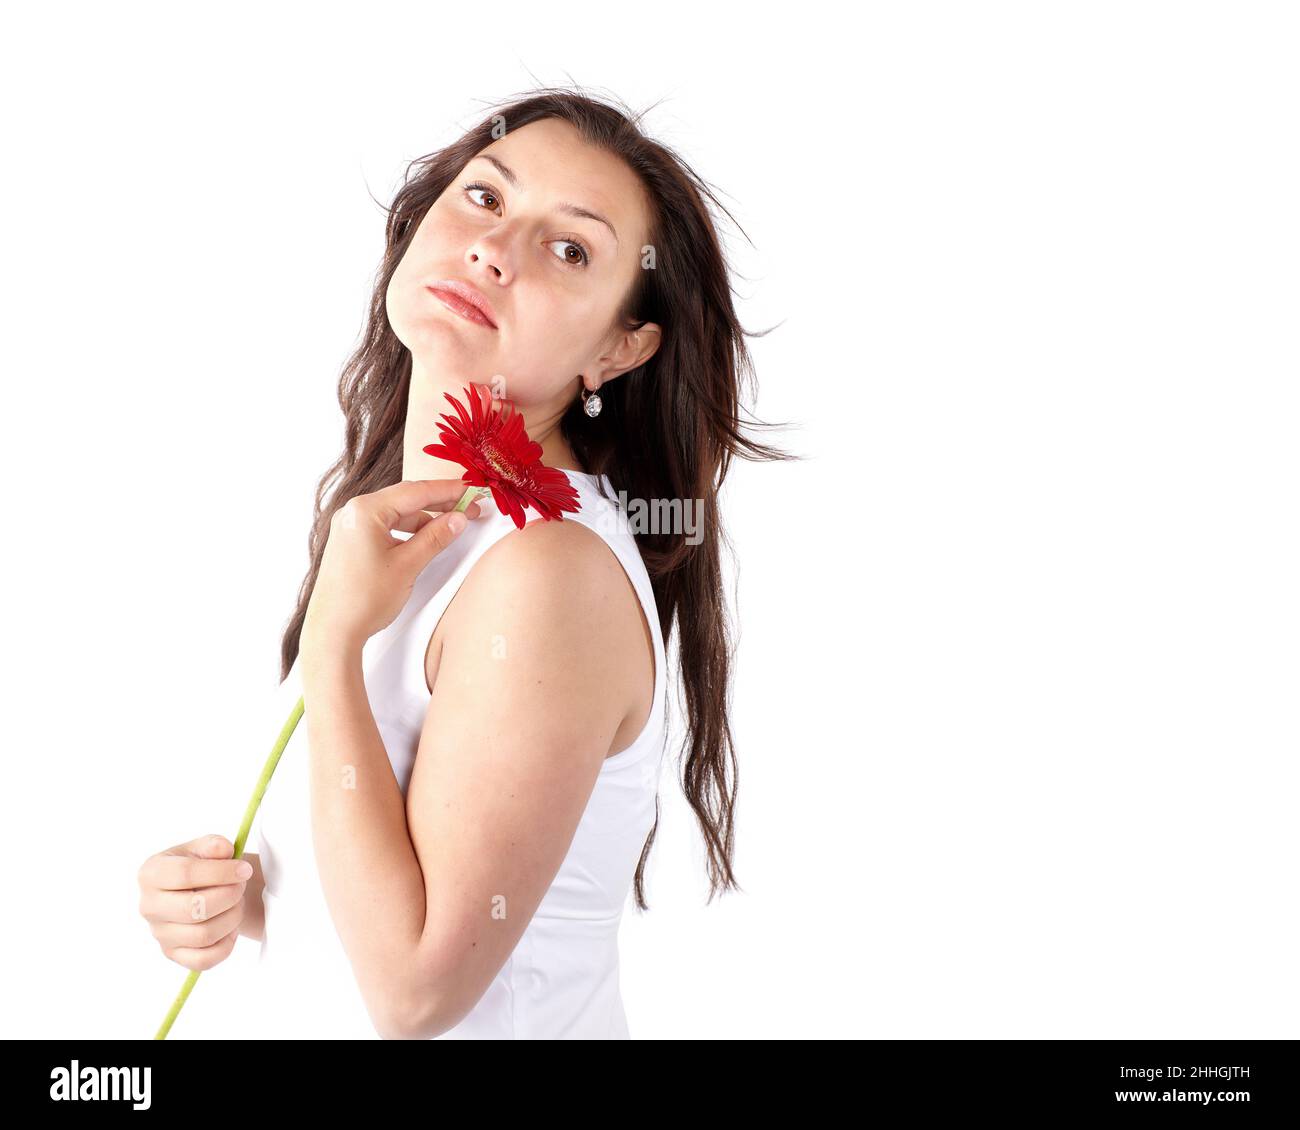 Spring portrait of young woman with healthy long hair holding red gerbera flower. Beautiful female model face. Isolated on white background. Stock Photo